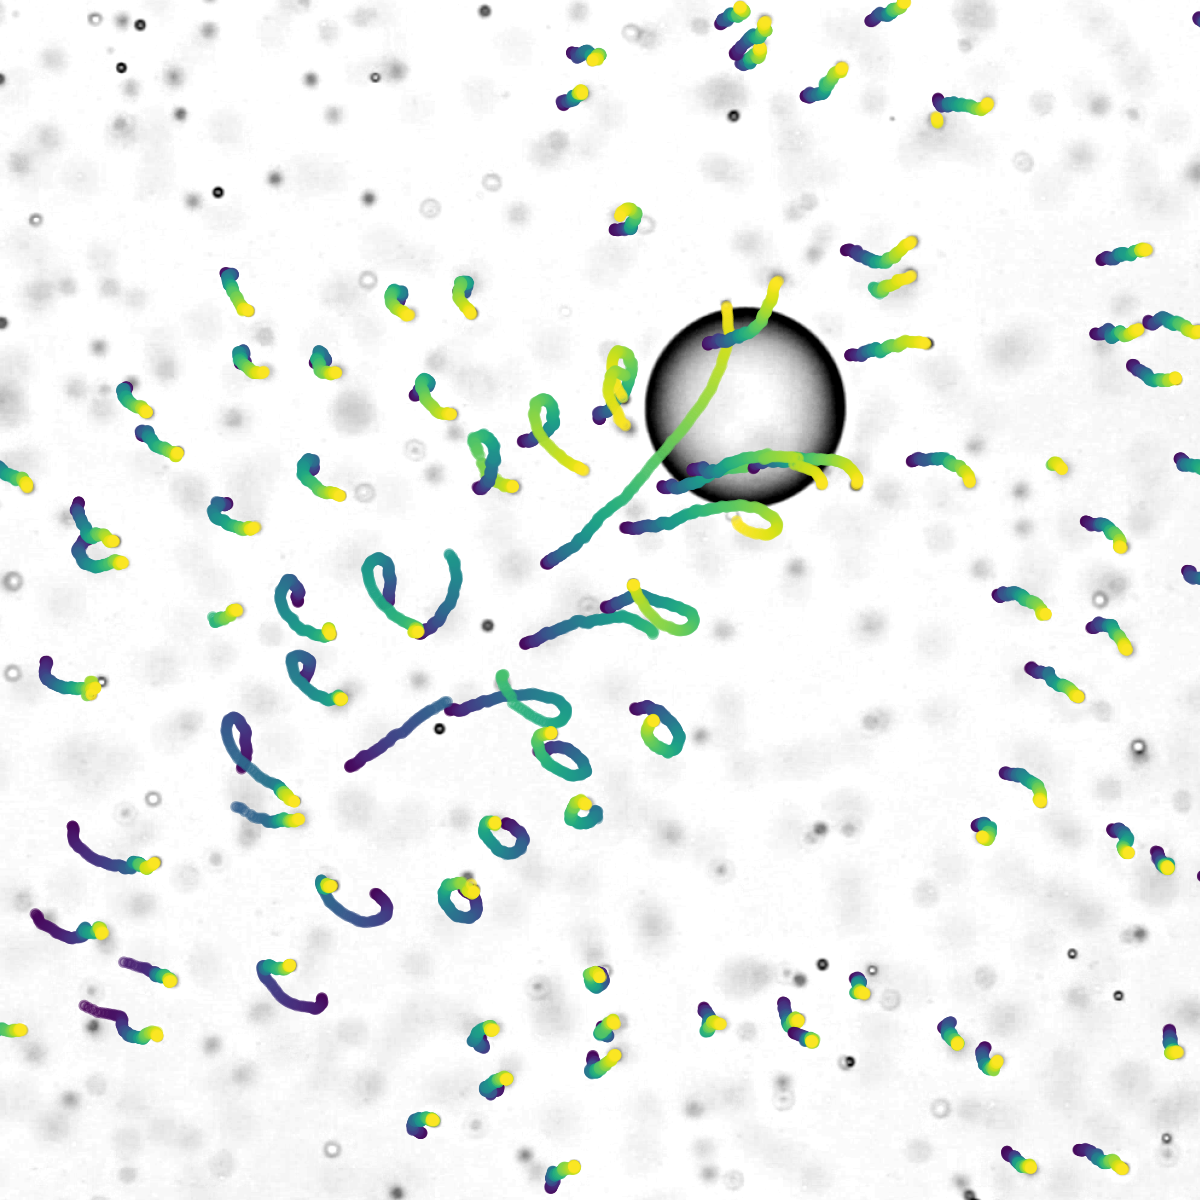 a gray particle that has moved smaller particles in its wake with their paths shown in colored lines